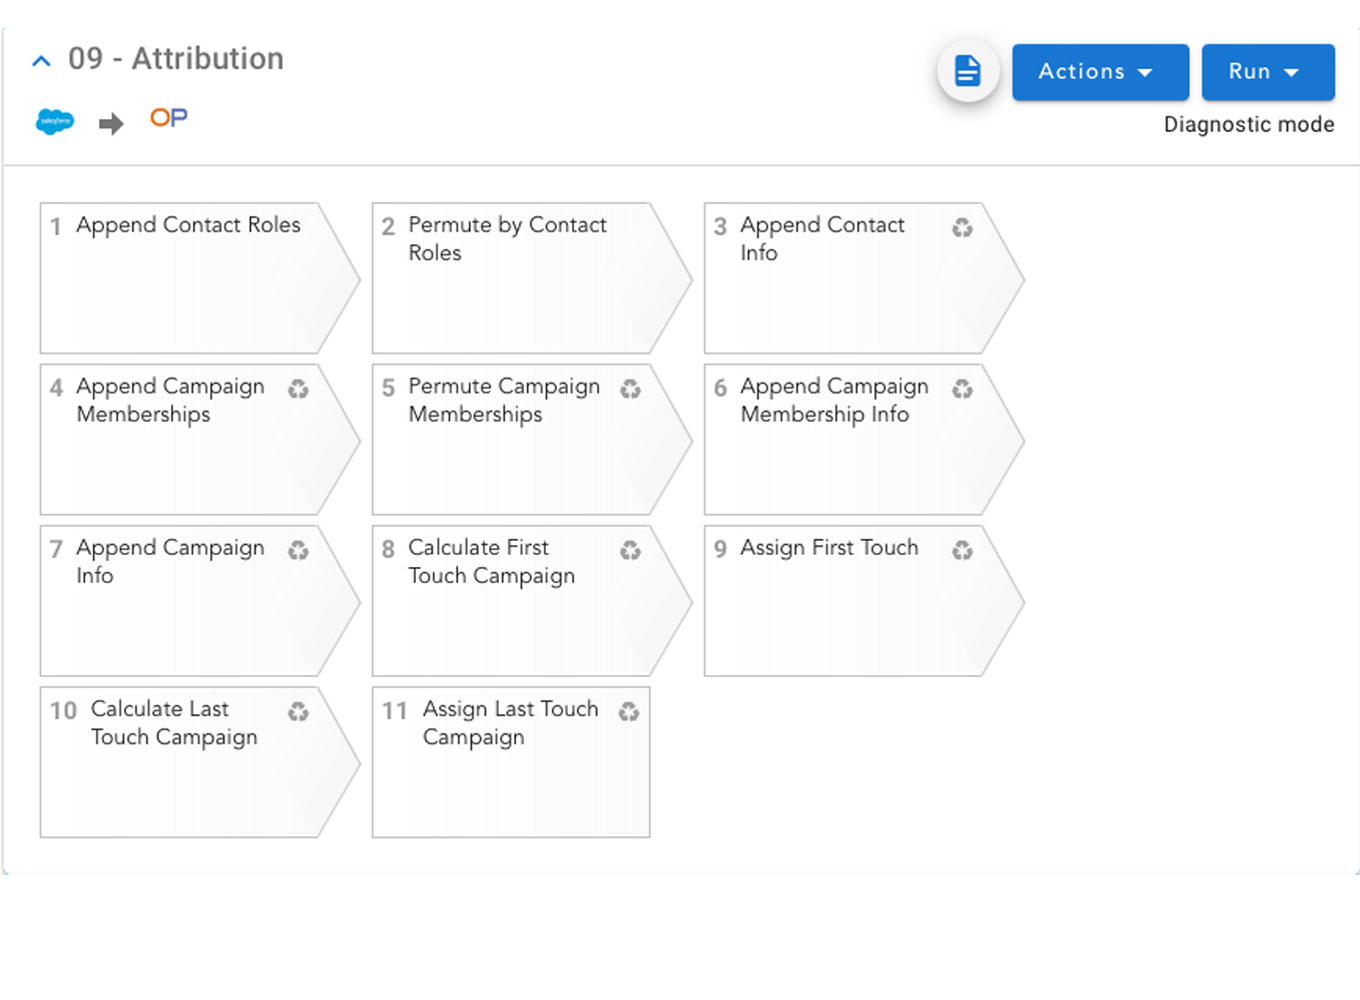 More accurate attribution models snapshot